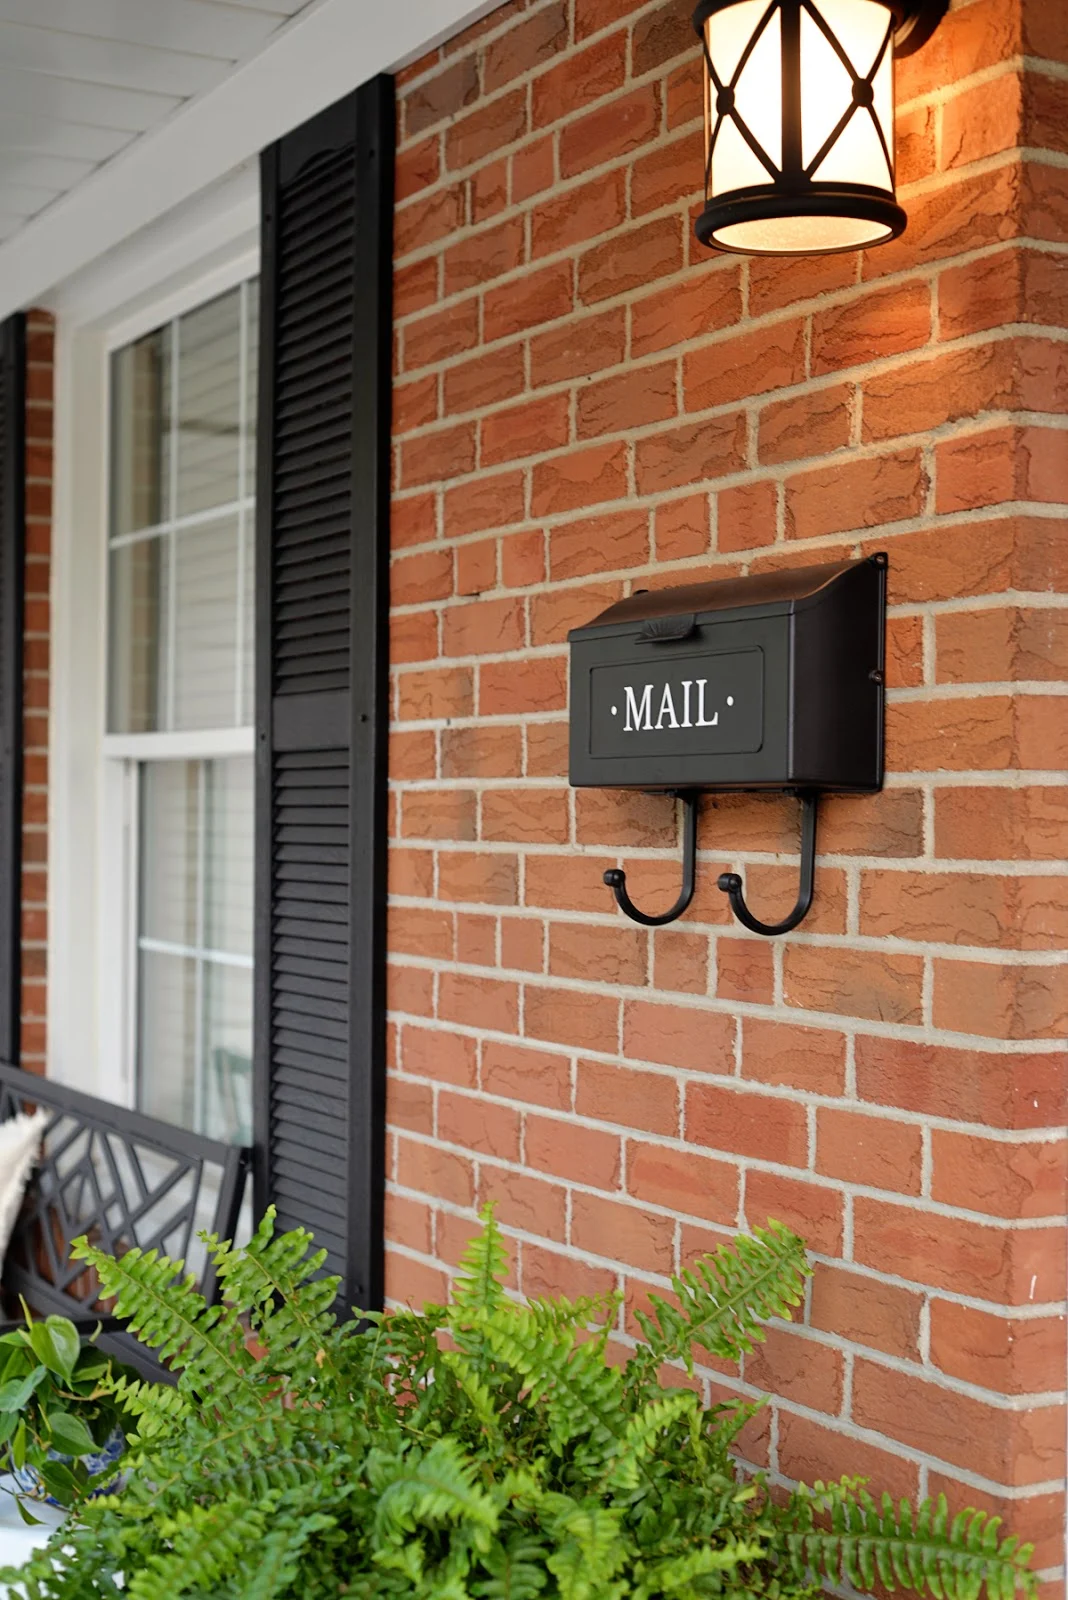 front porch decorating ideas for summer, red brick house with black shutters and mailbox decal